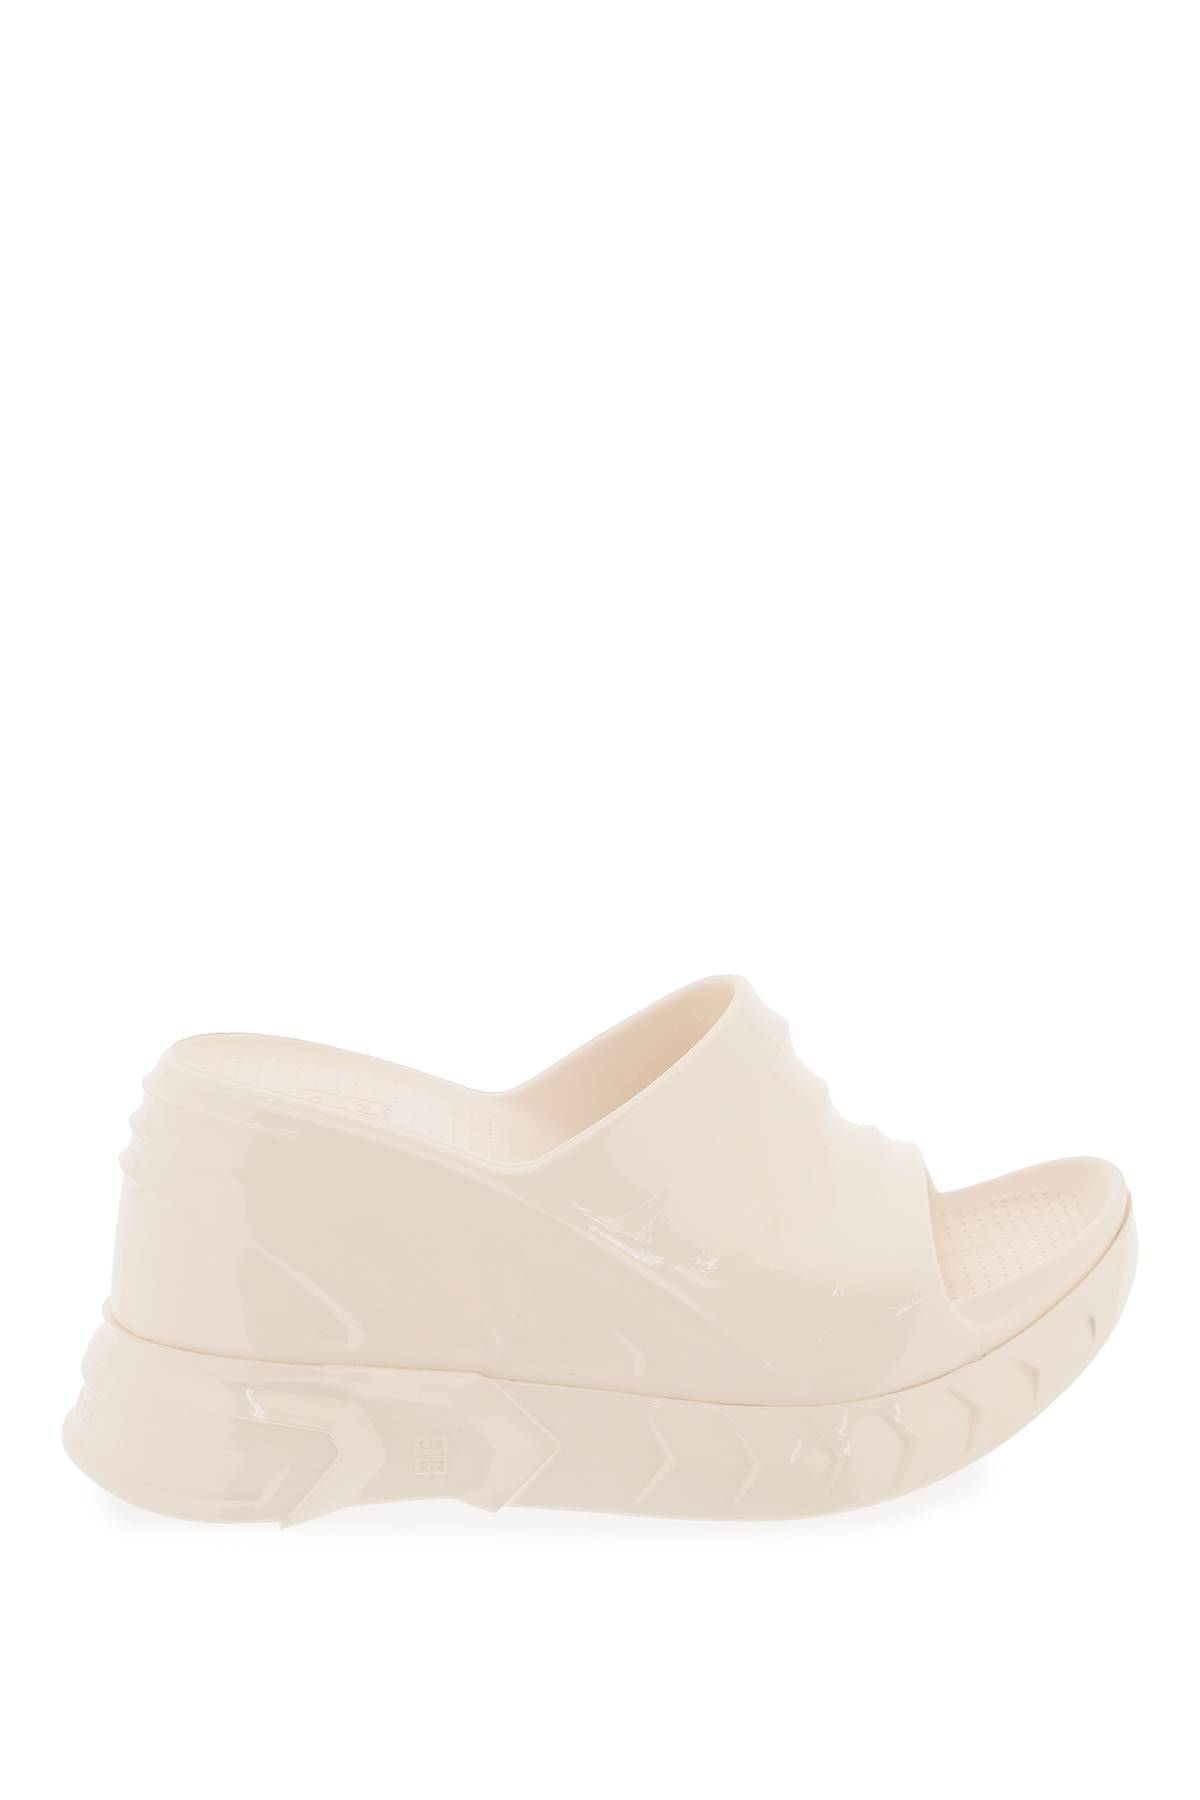 Givenchy GIVENCHY marshmallow rubber wedge sandals with platform